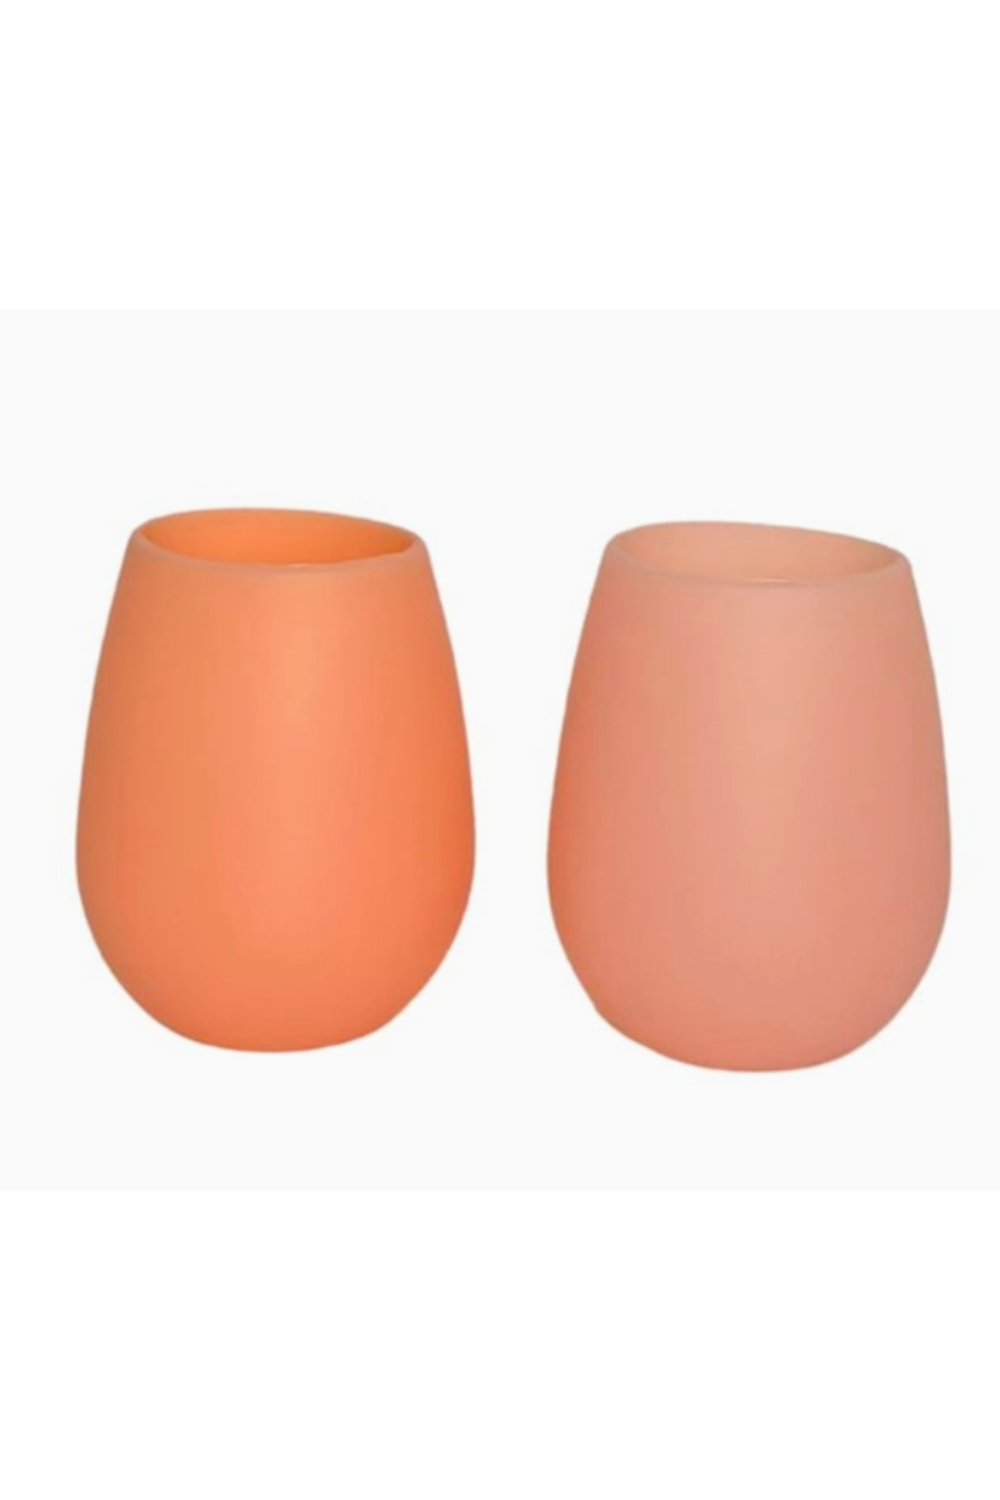 Silicone Wine Glass Set of 2 - STEMLESS Peach / Petal